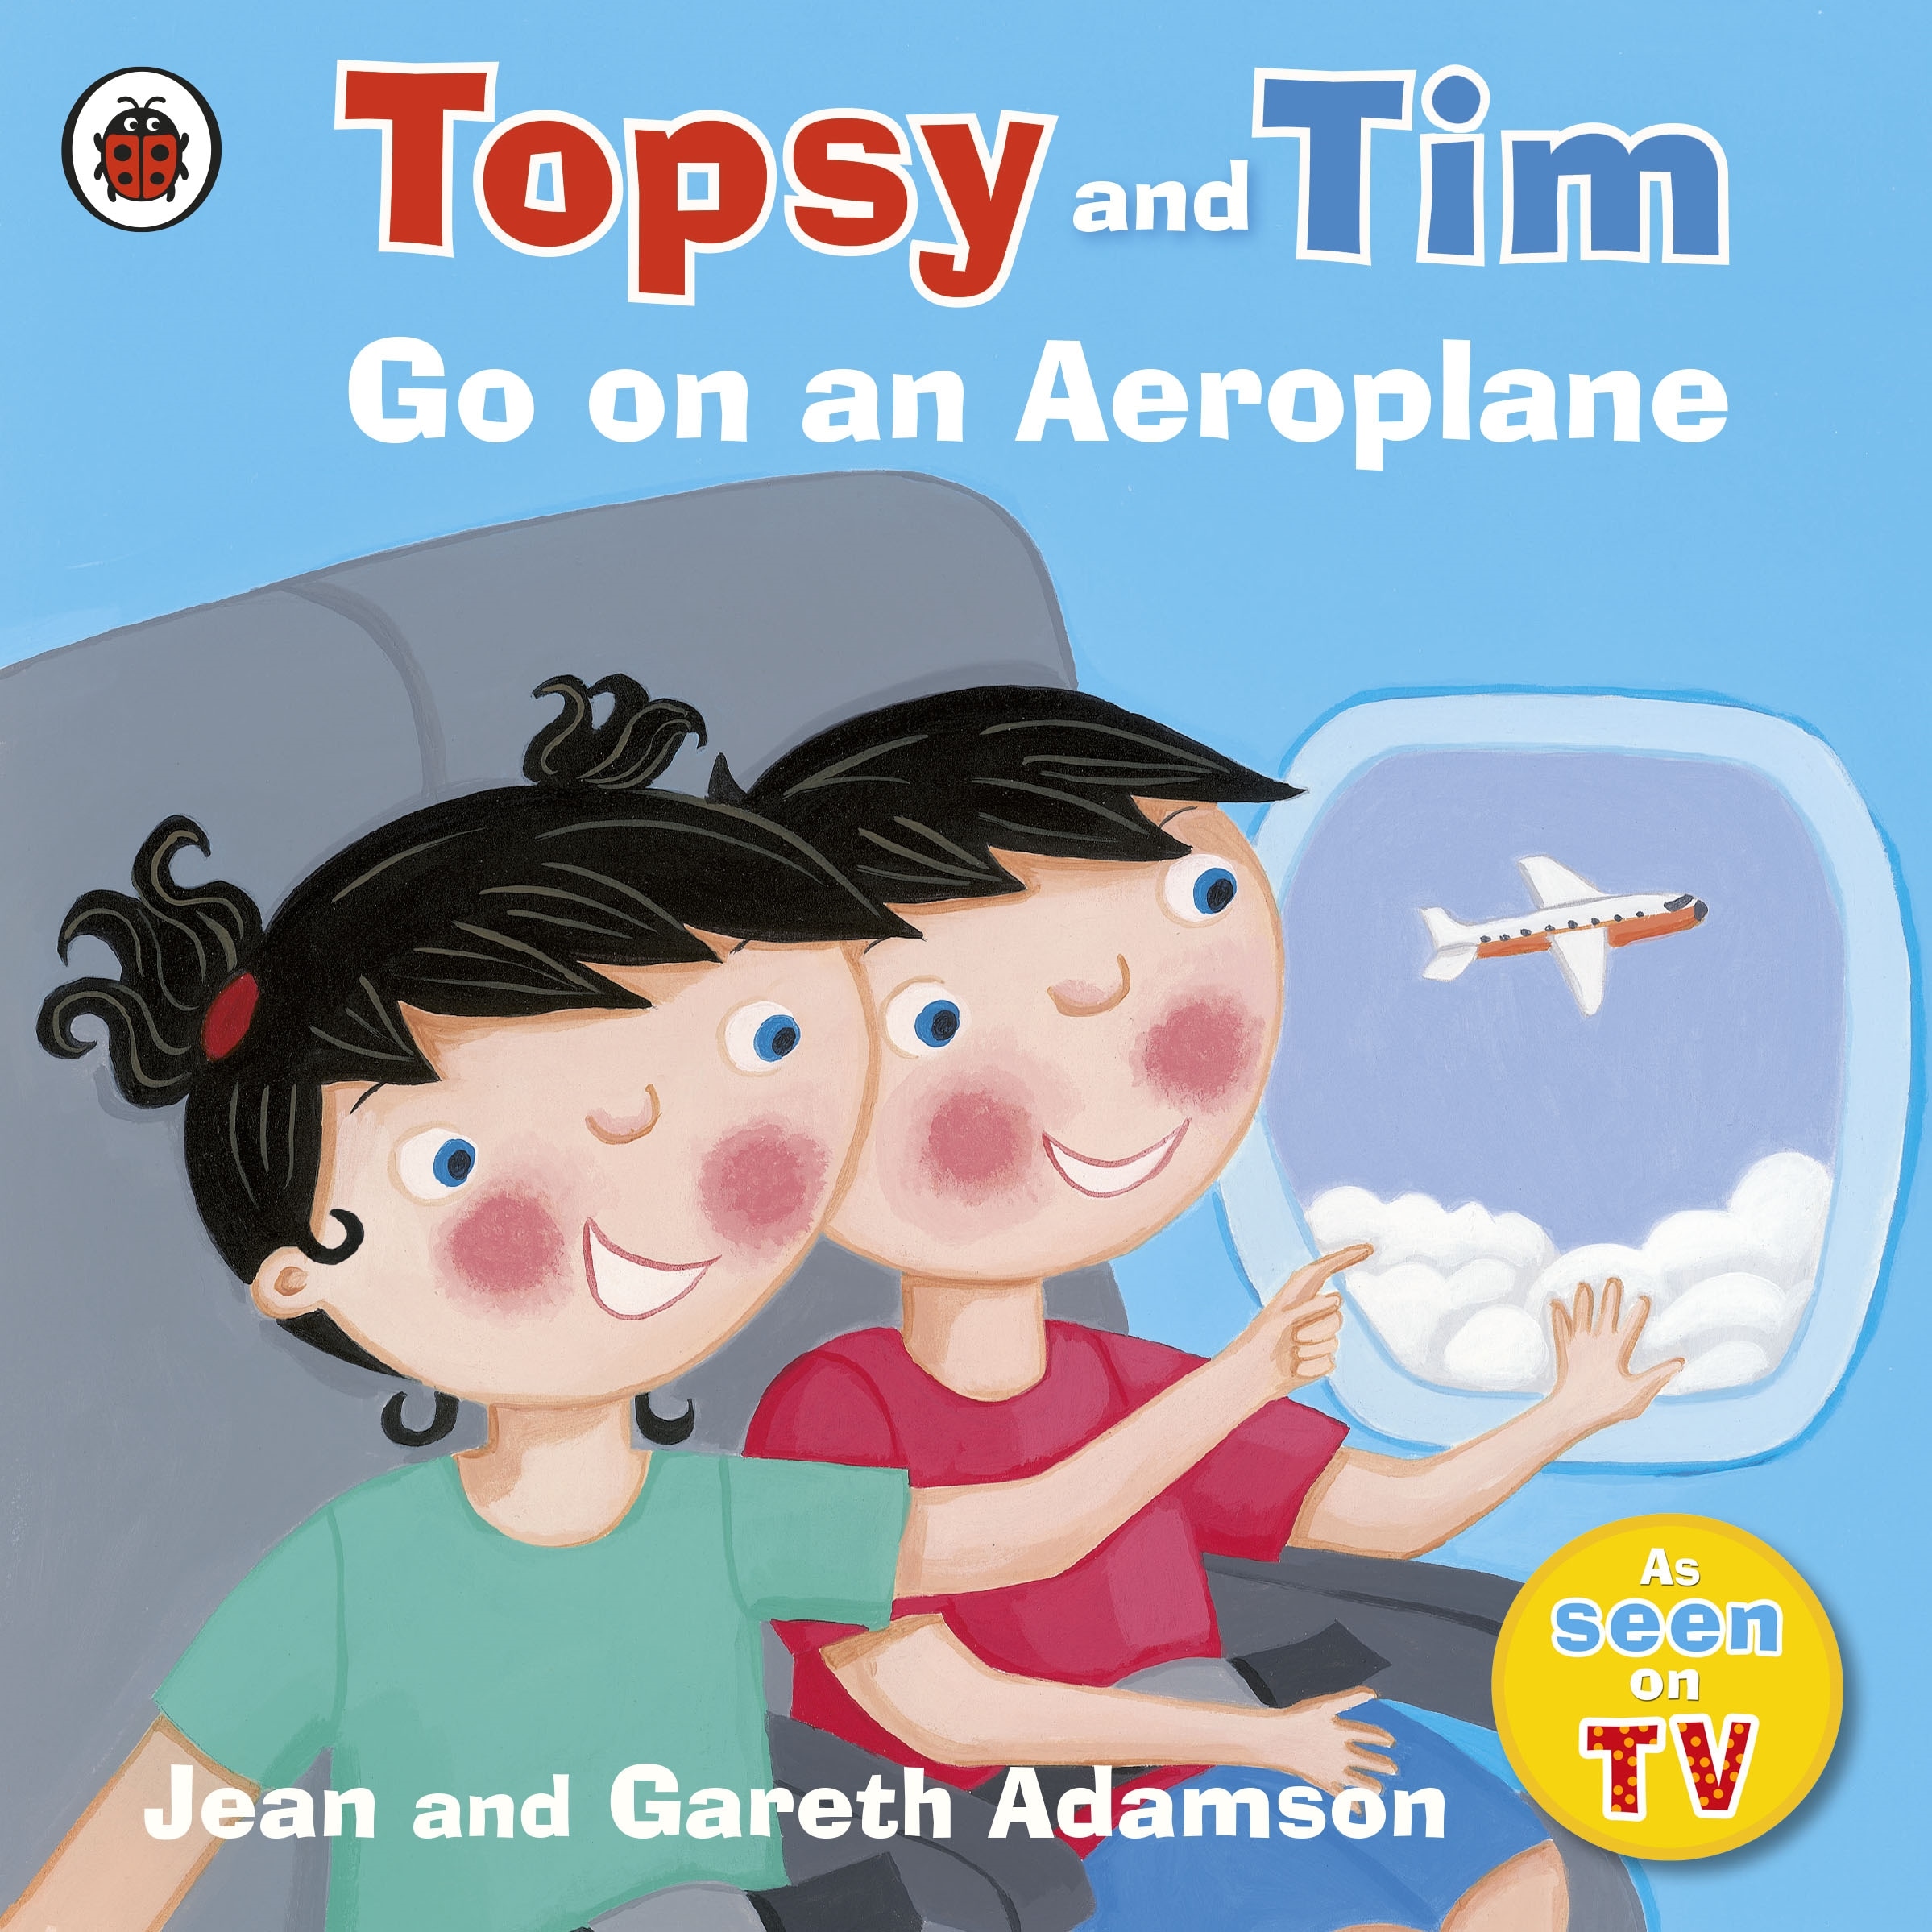 Book “Topsy and Tim: Go on an Aeroplane” by Jean Adamson — April 2, 2009